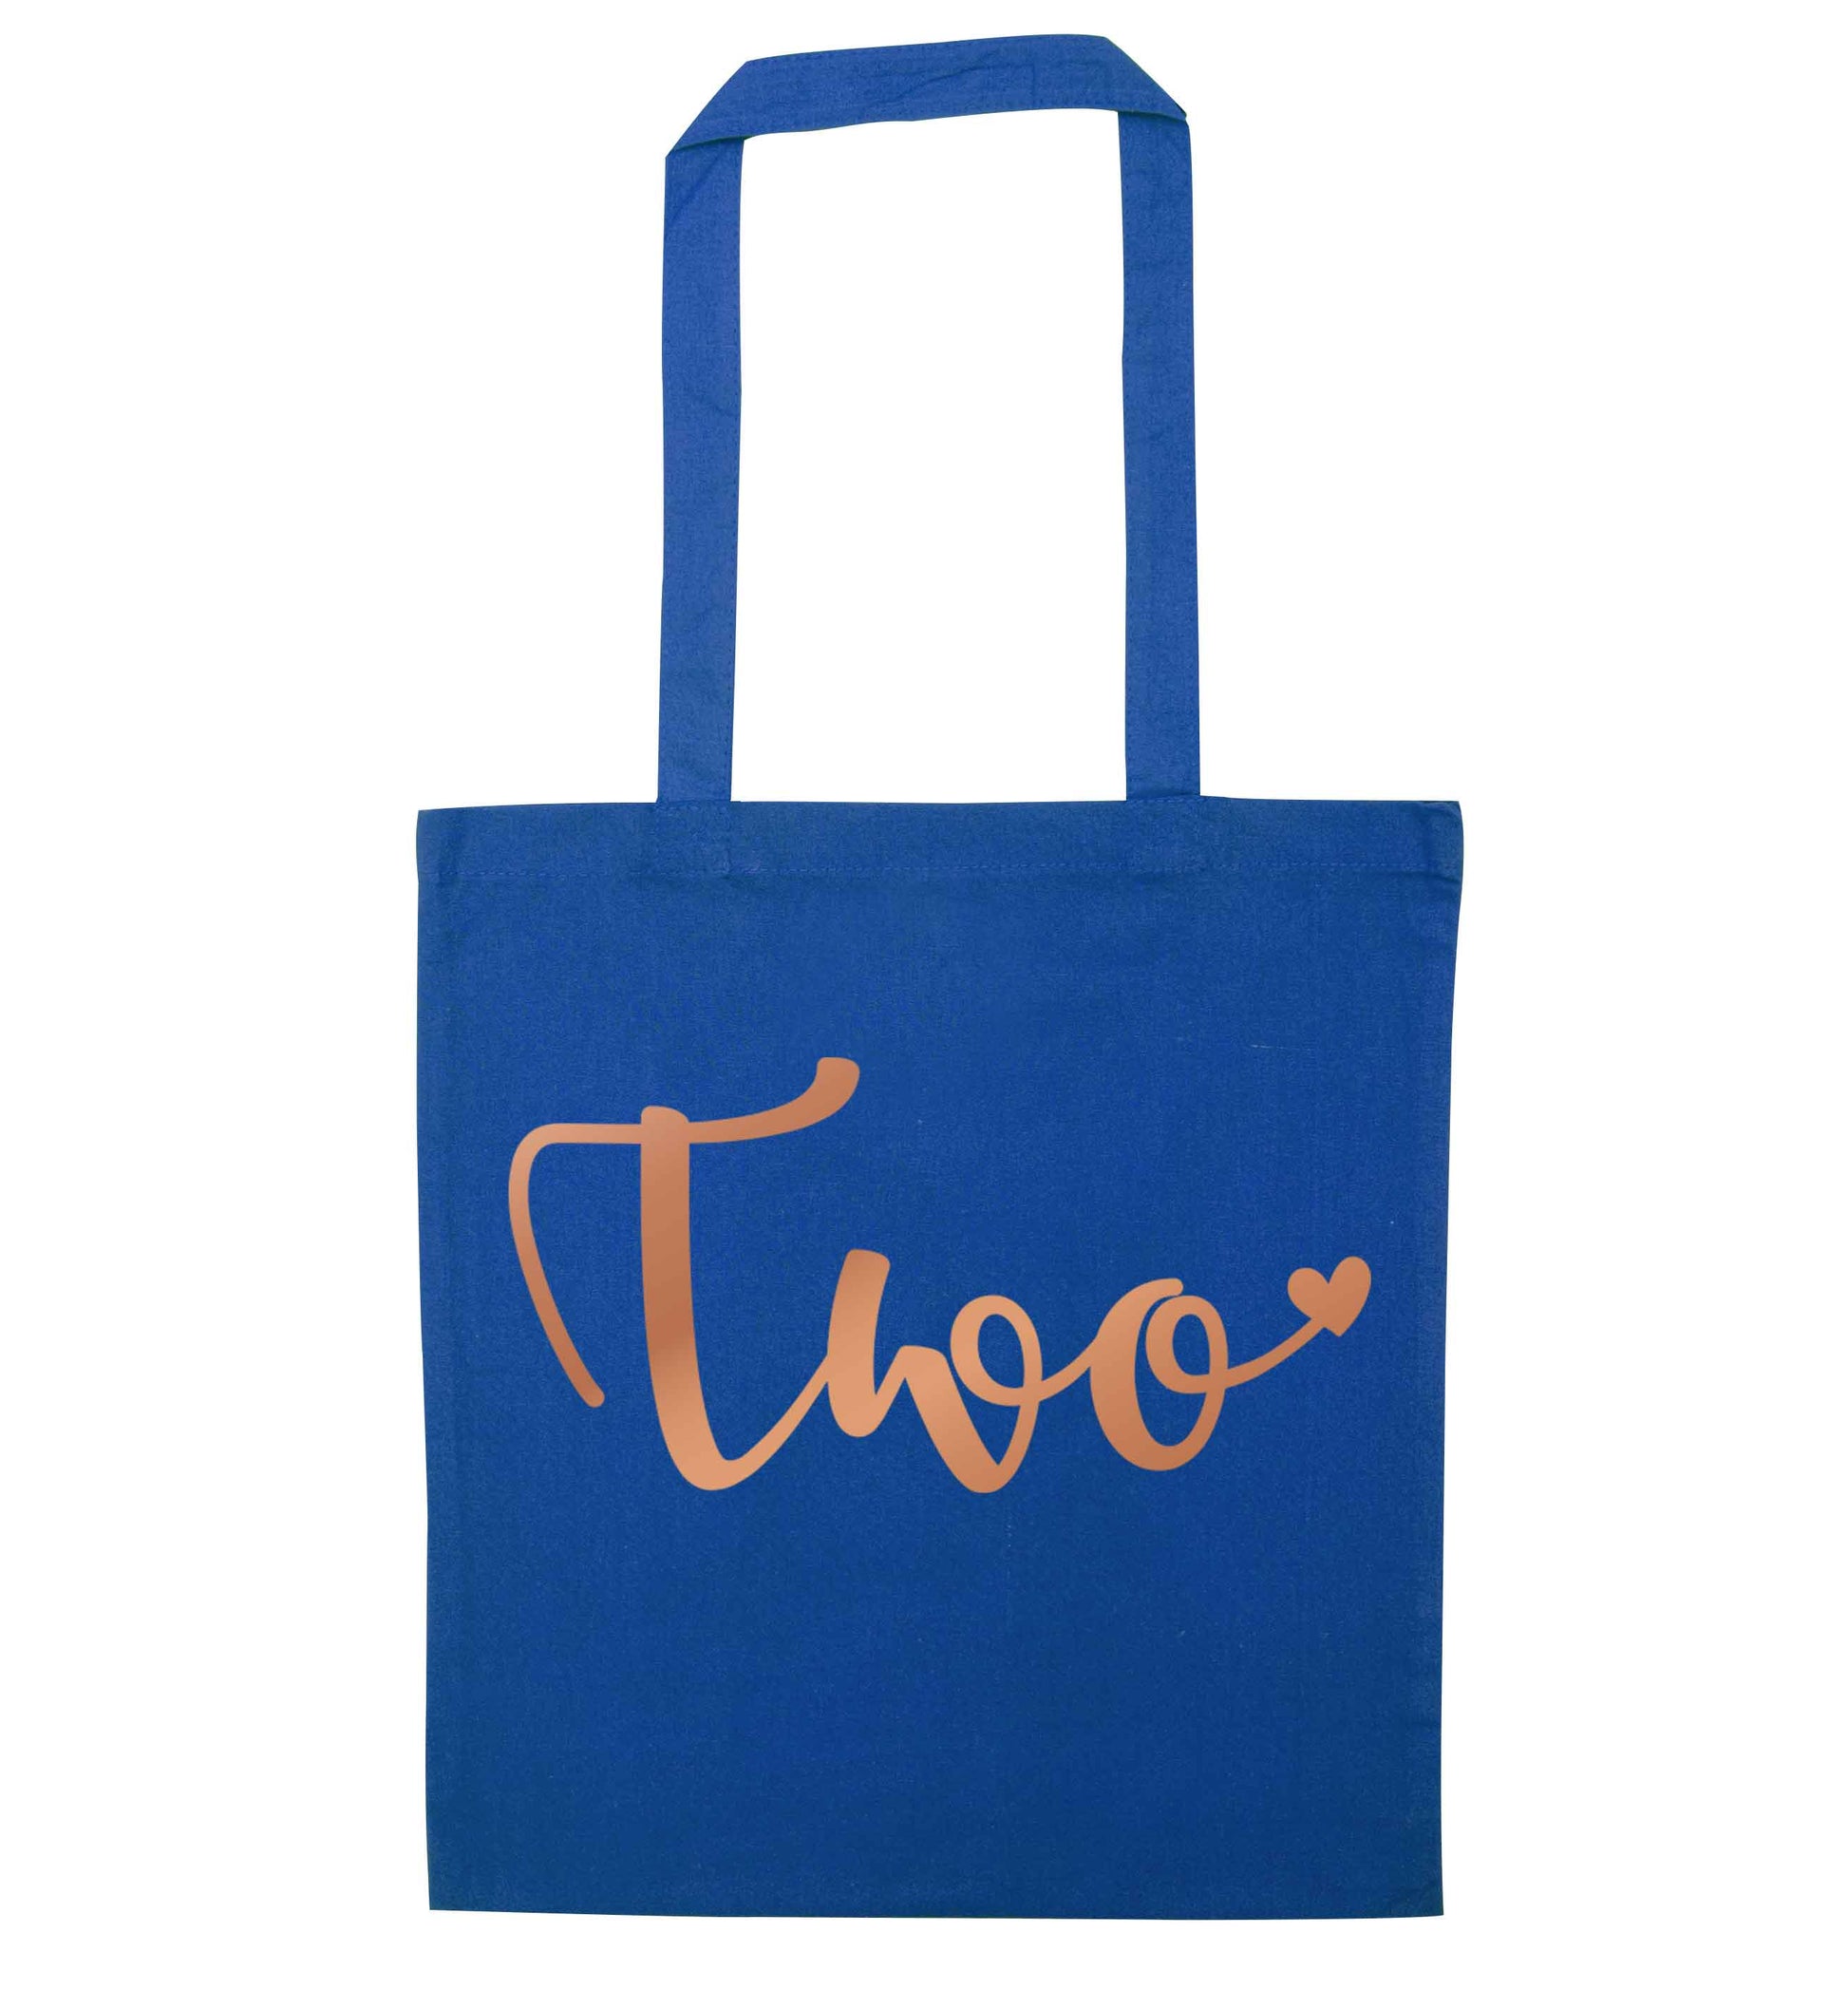 Two rose gold blue tote bag